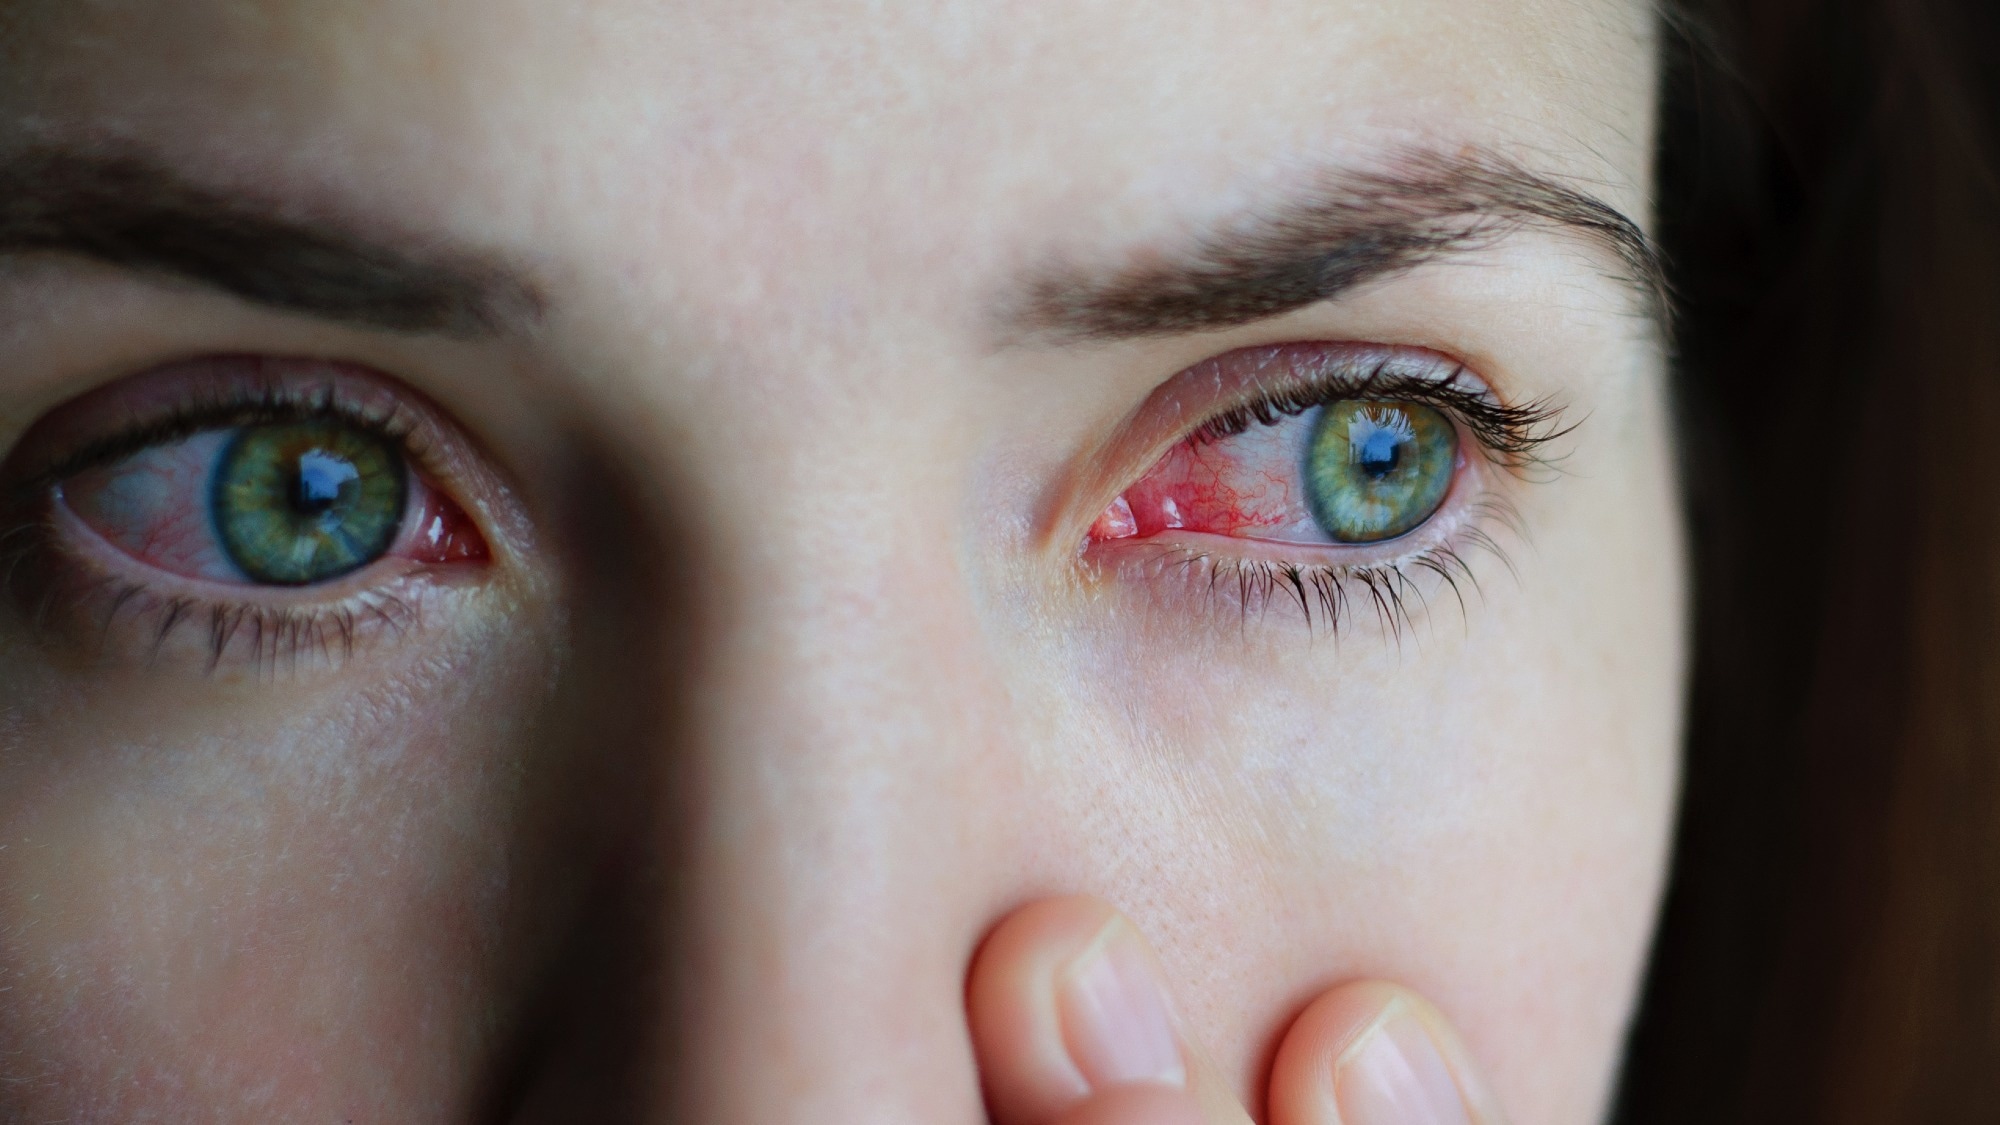 Study: Monkeypox and ocular implications in humans. Image Credit: Domaskina/Shutterstock